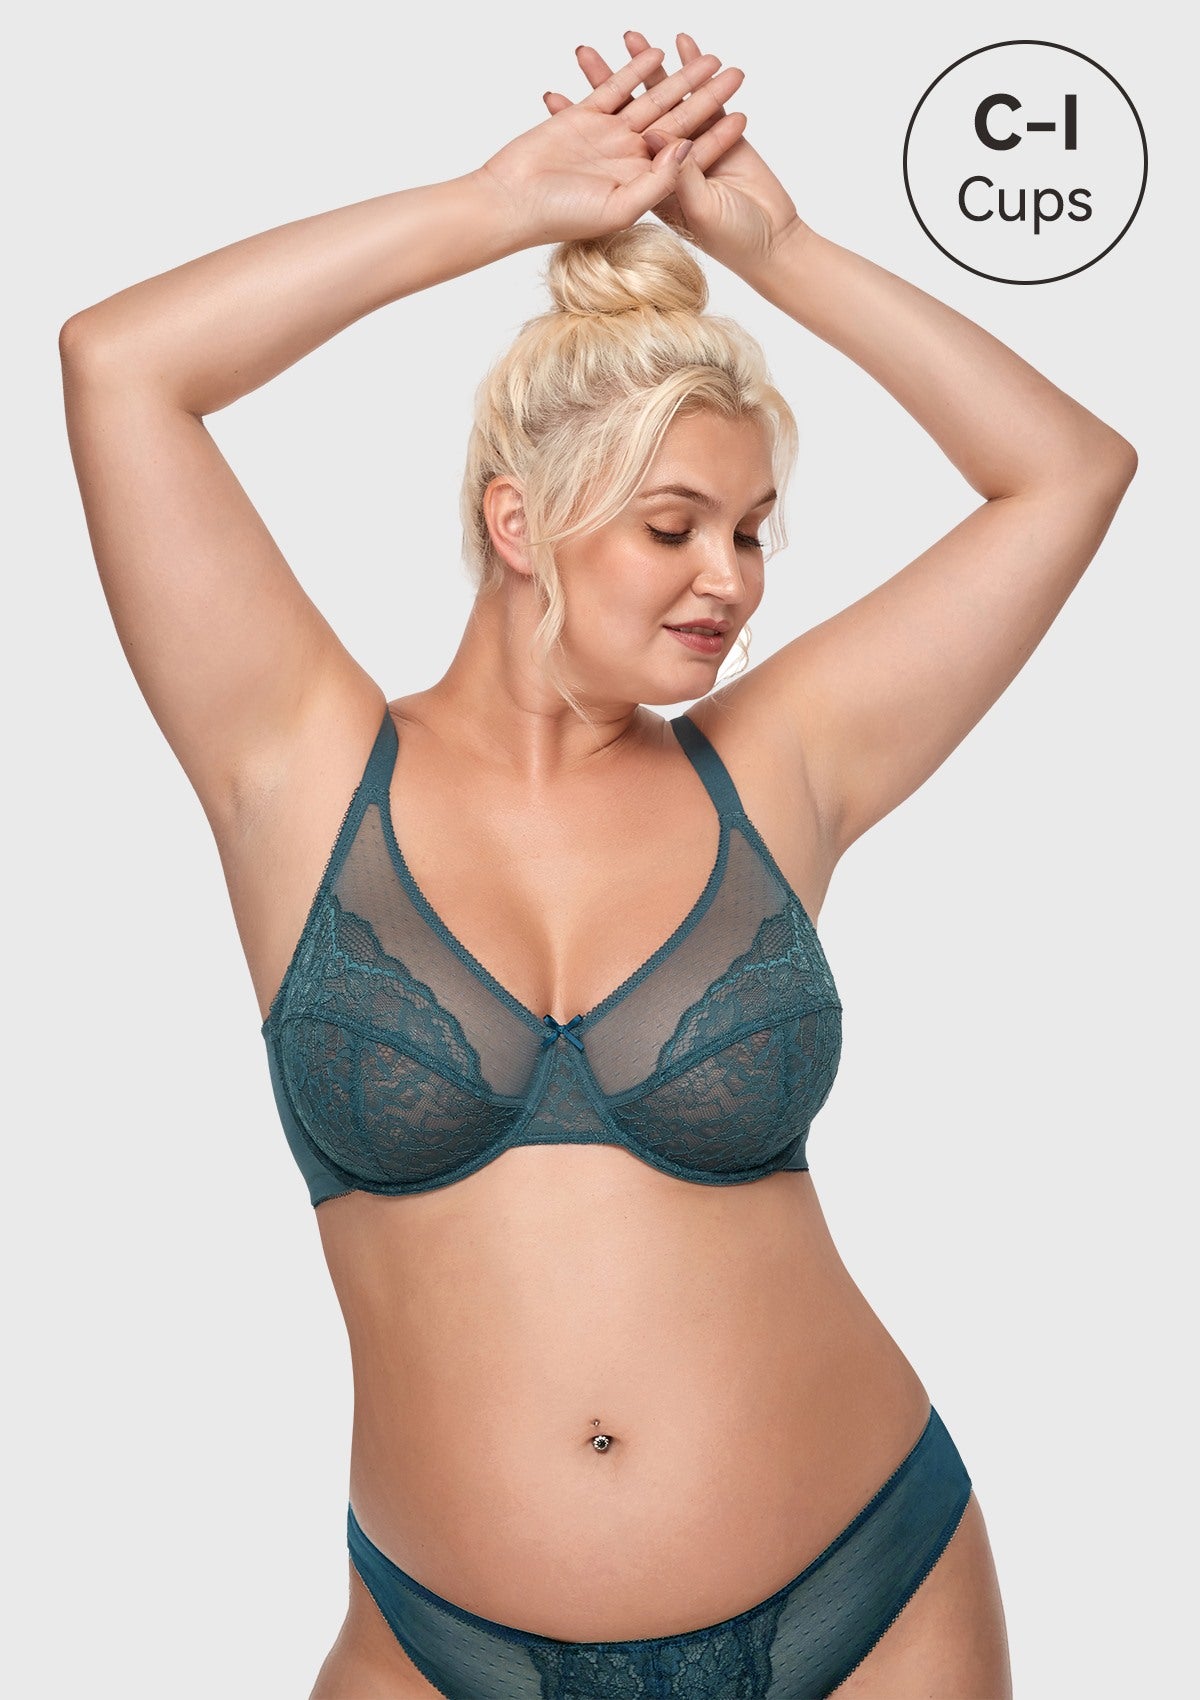 HSIA Enchante Full Coverage Bra: Supportive Bra For Big Busts - Balsam Blue / 40 / D